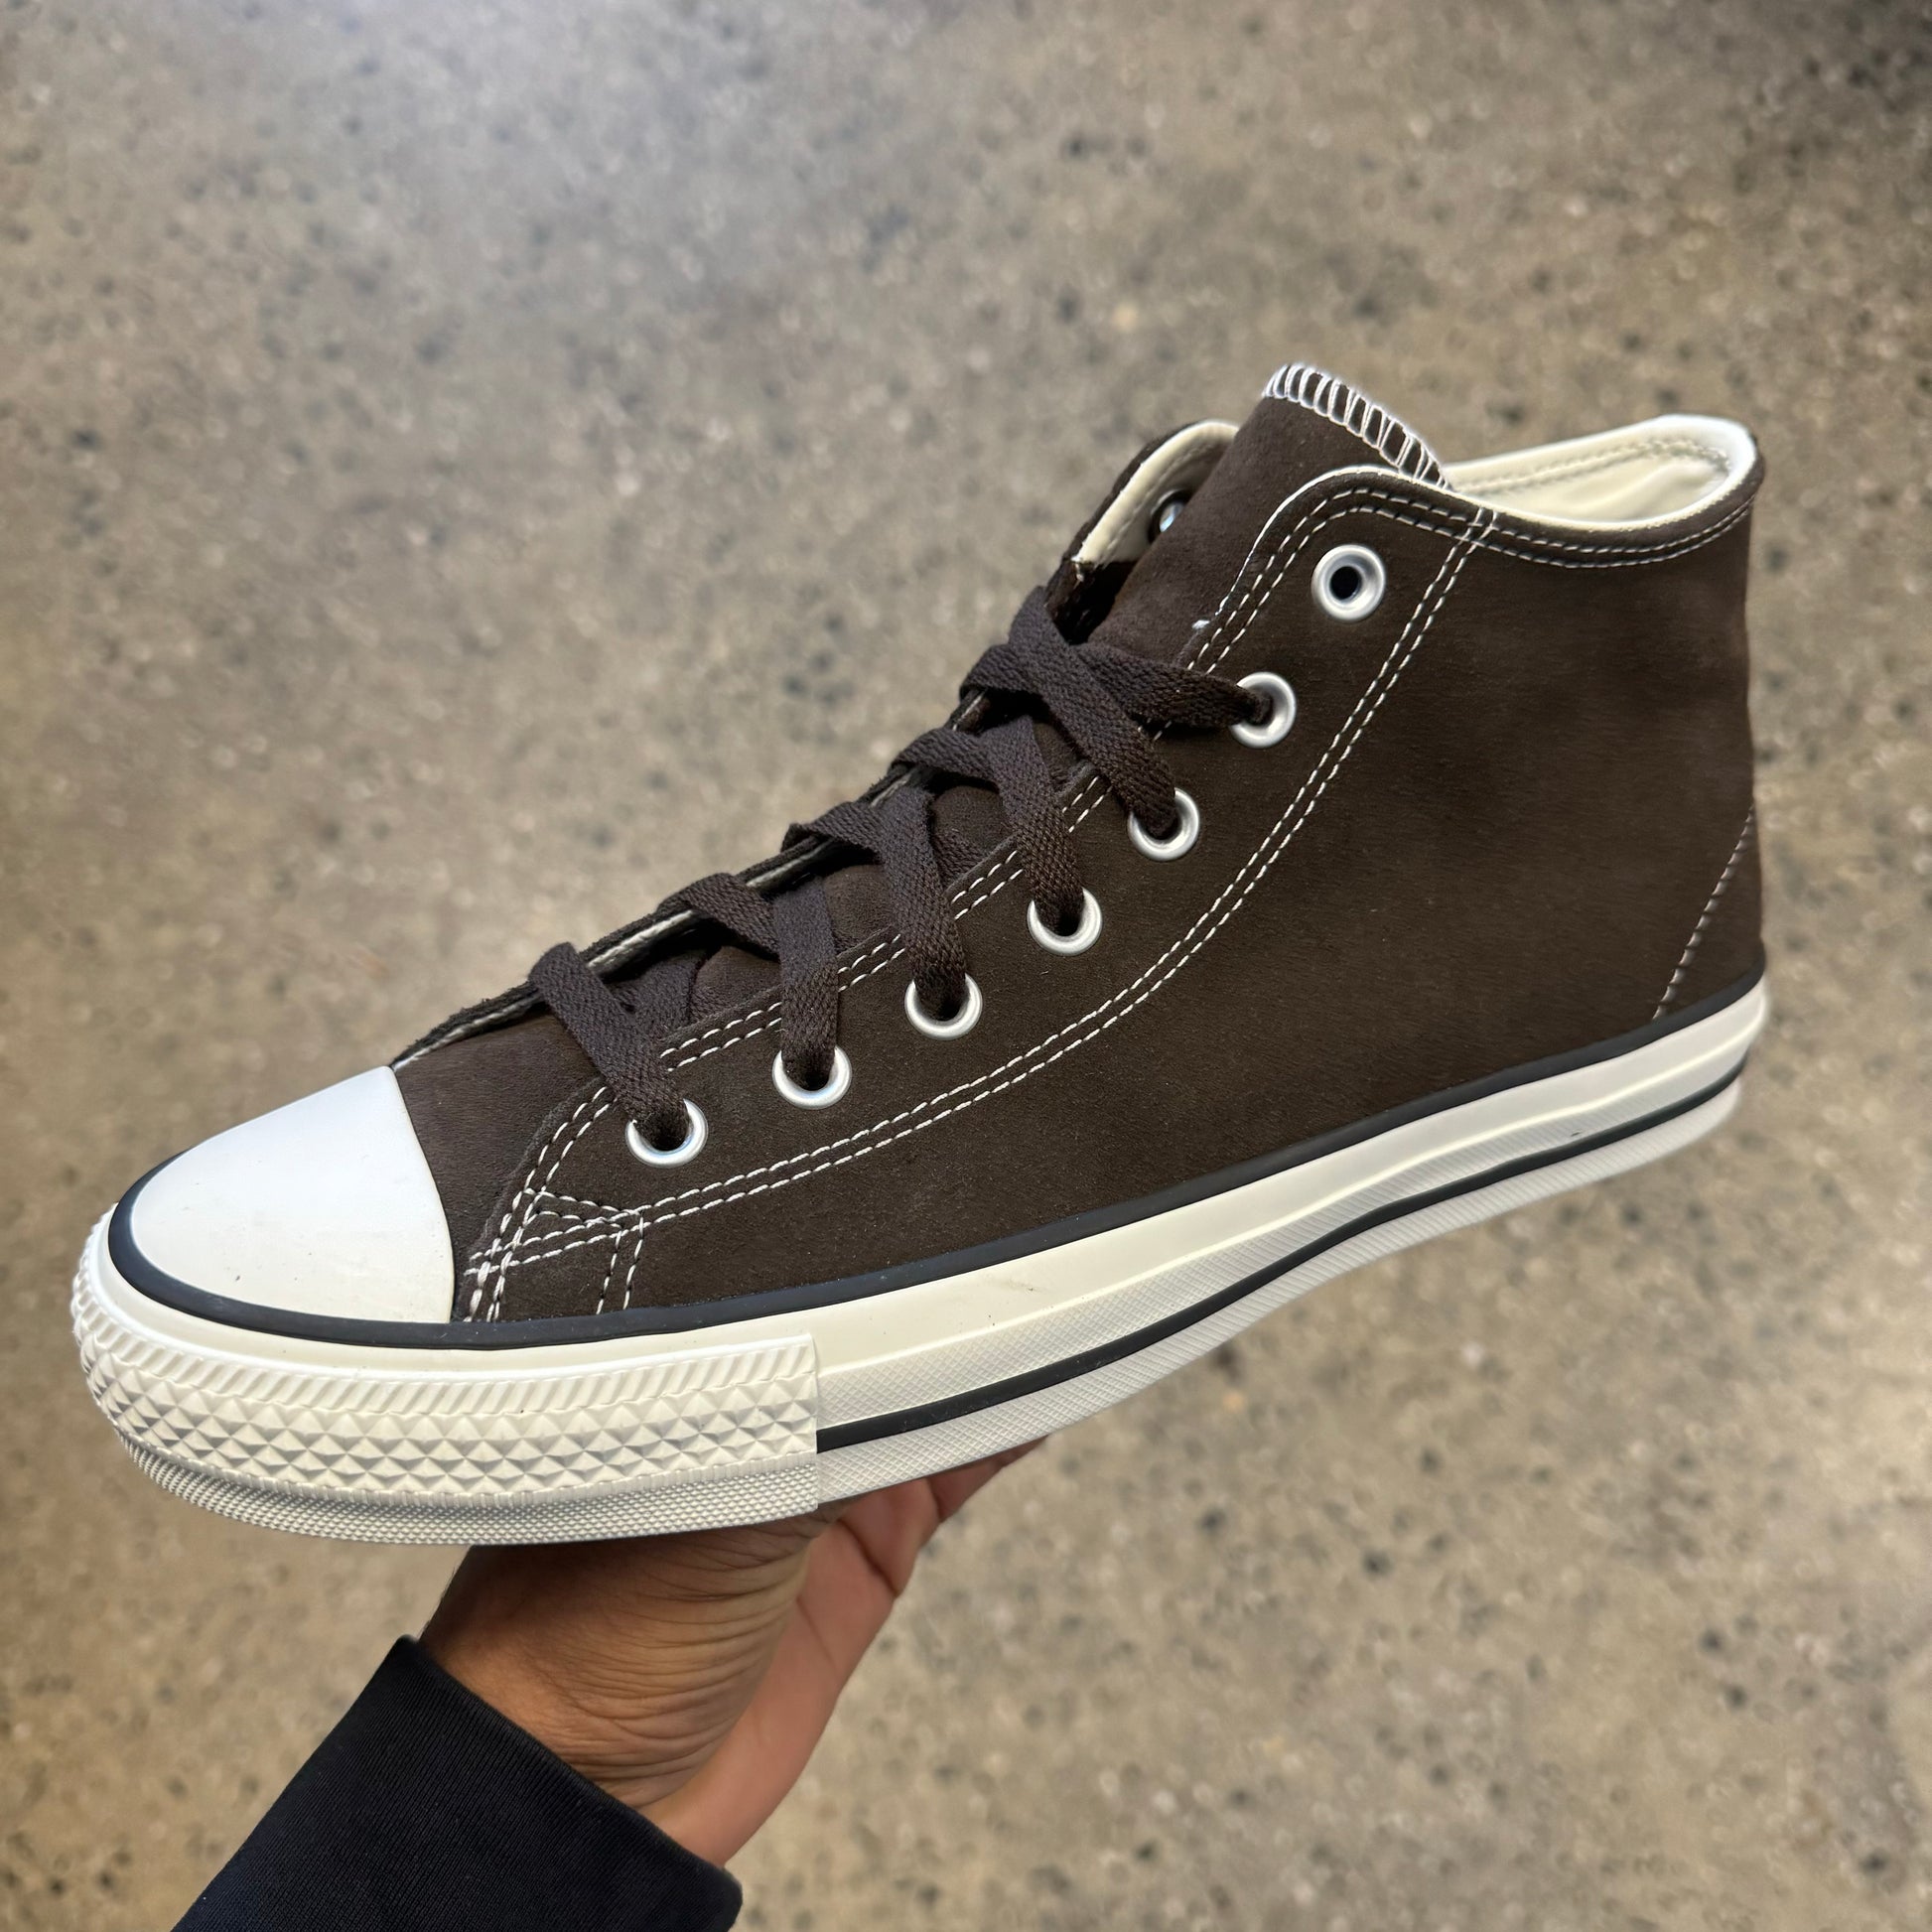 brown sneaker with white sole and toe, side view